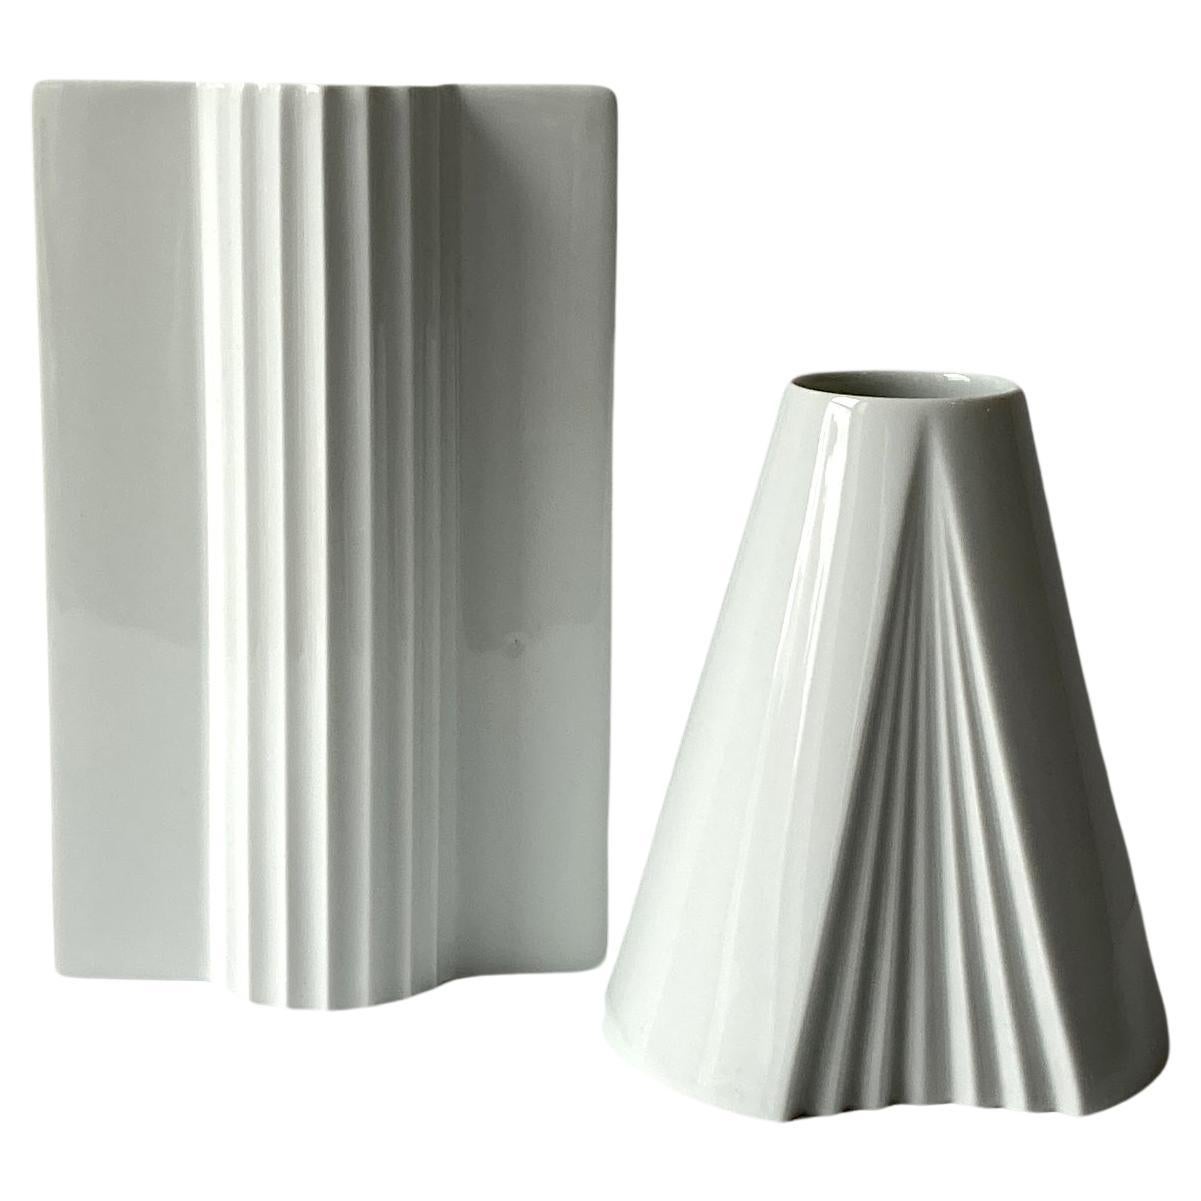 Rosenthal and Thomas Keramik White Porcelain Vases, Pair of Two For Sale